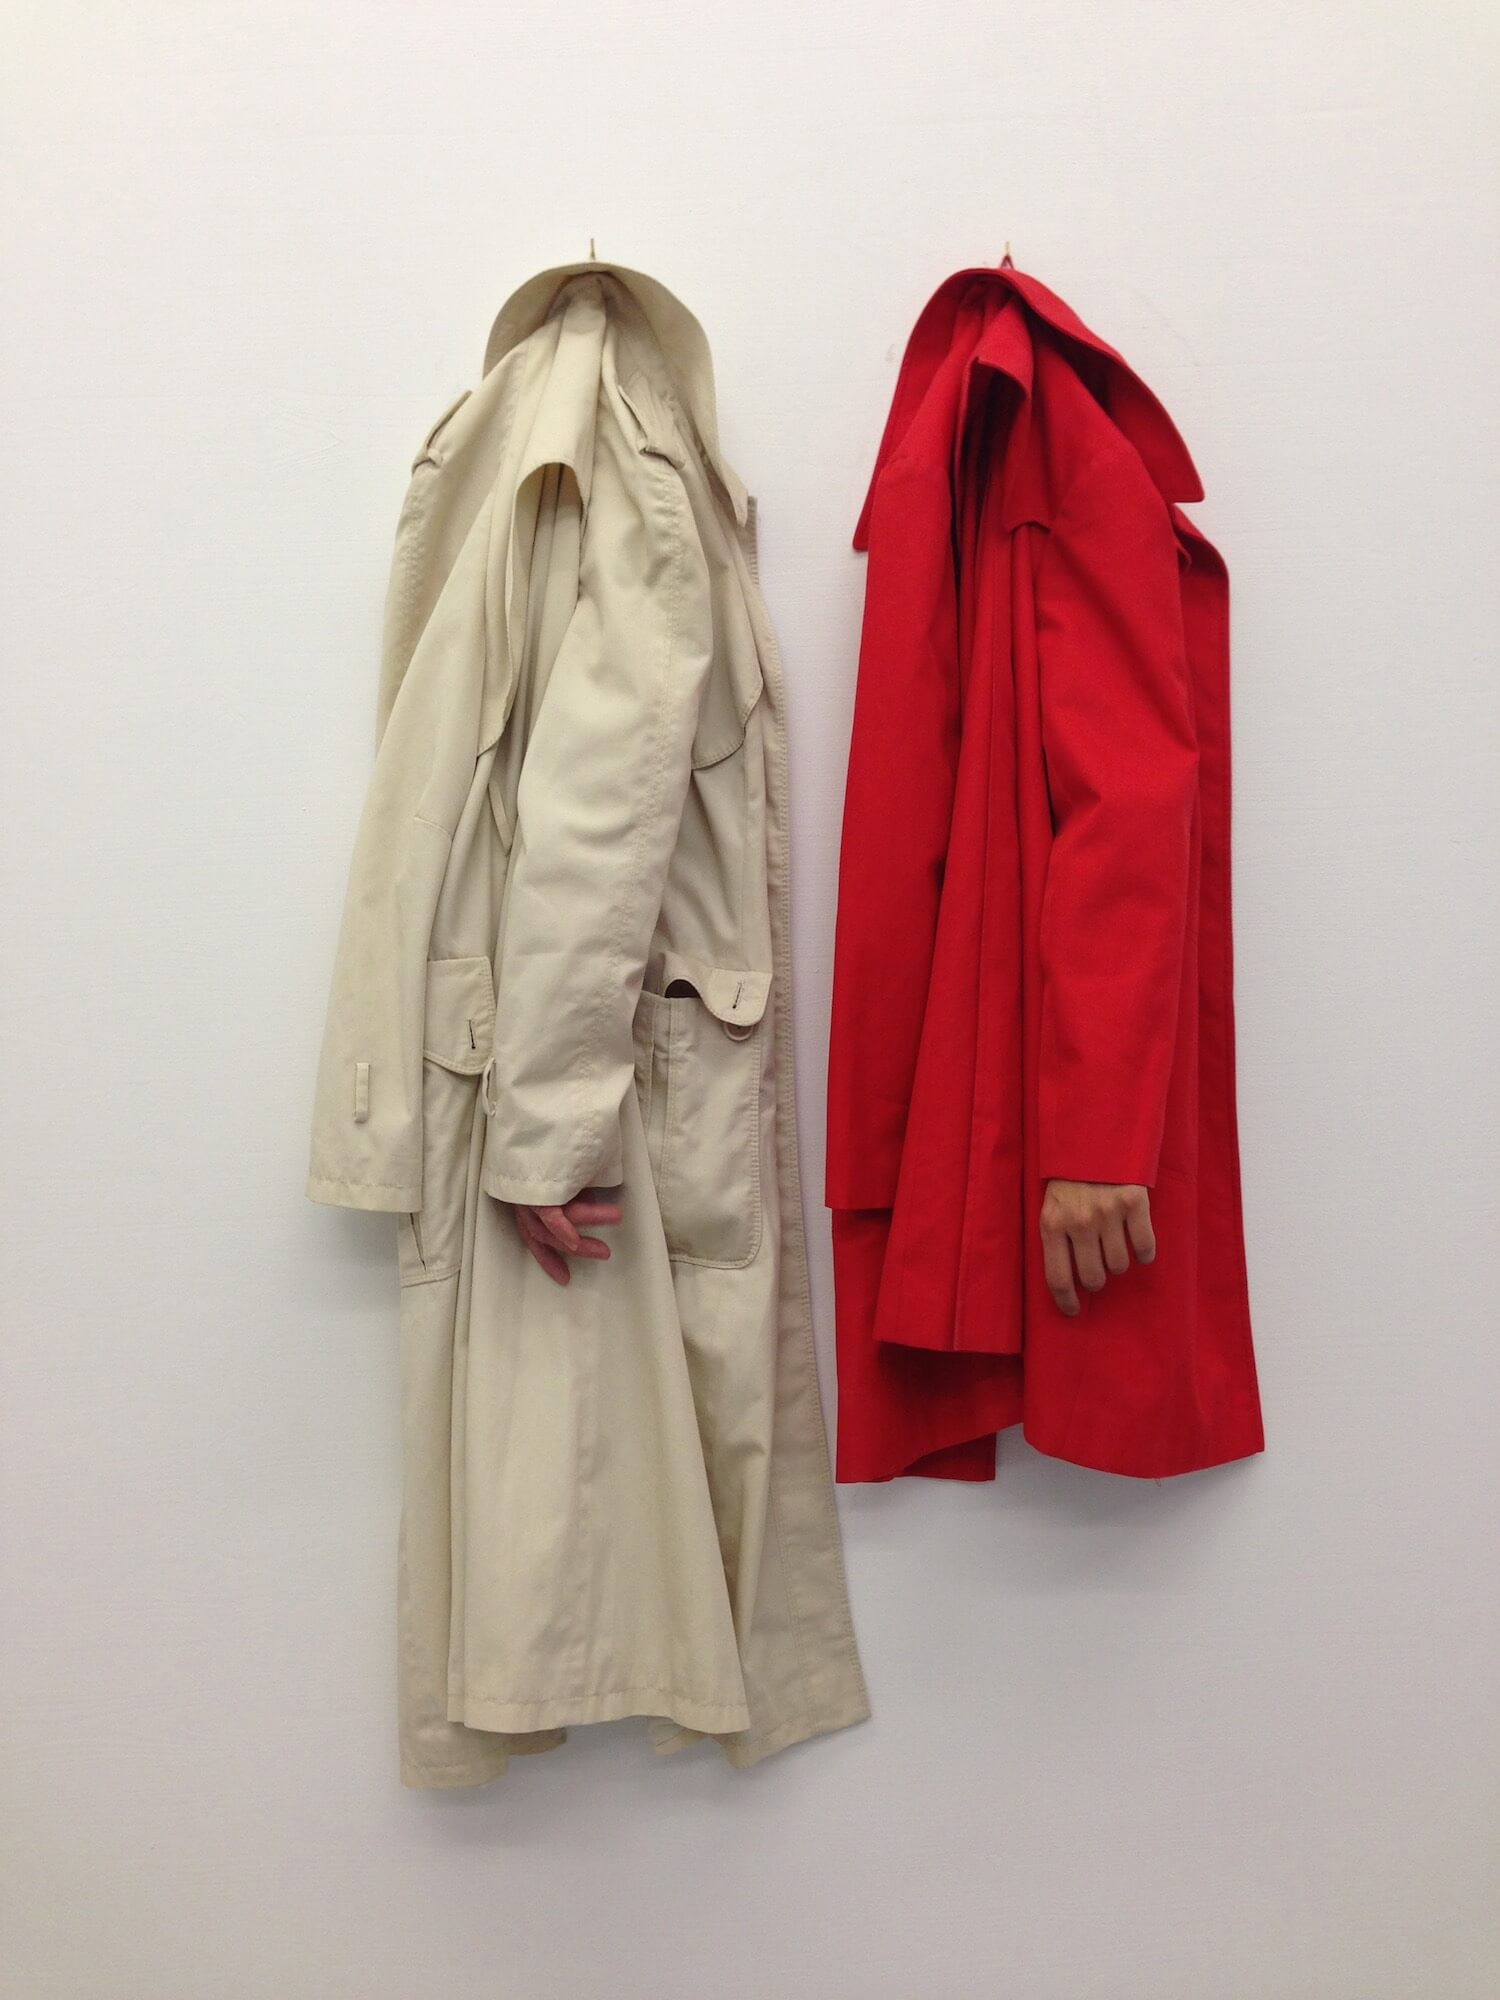 Jirí Kovanda, "Hanging Sleeves, Hiding Hands," made in collaboration with Eva Koťátková, 2013. Performance and object, dimensions variable. Courtesy of the artist and Wallspace, New York. 